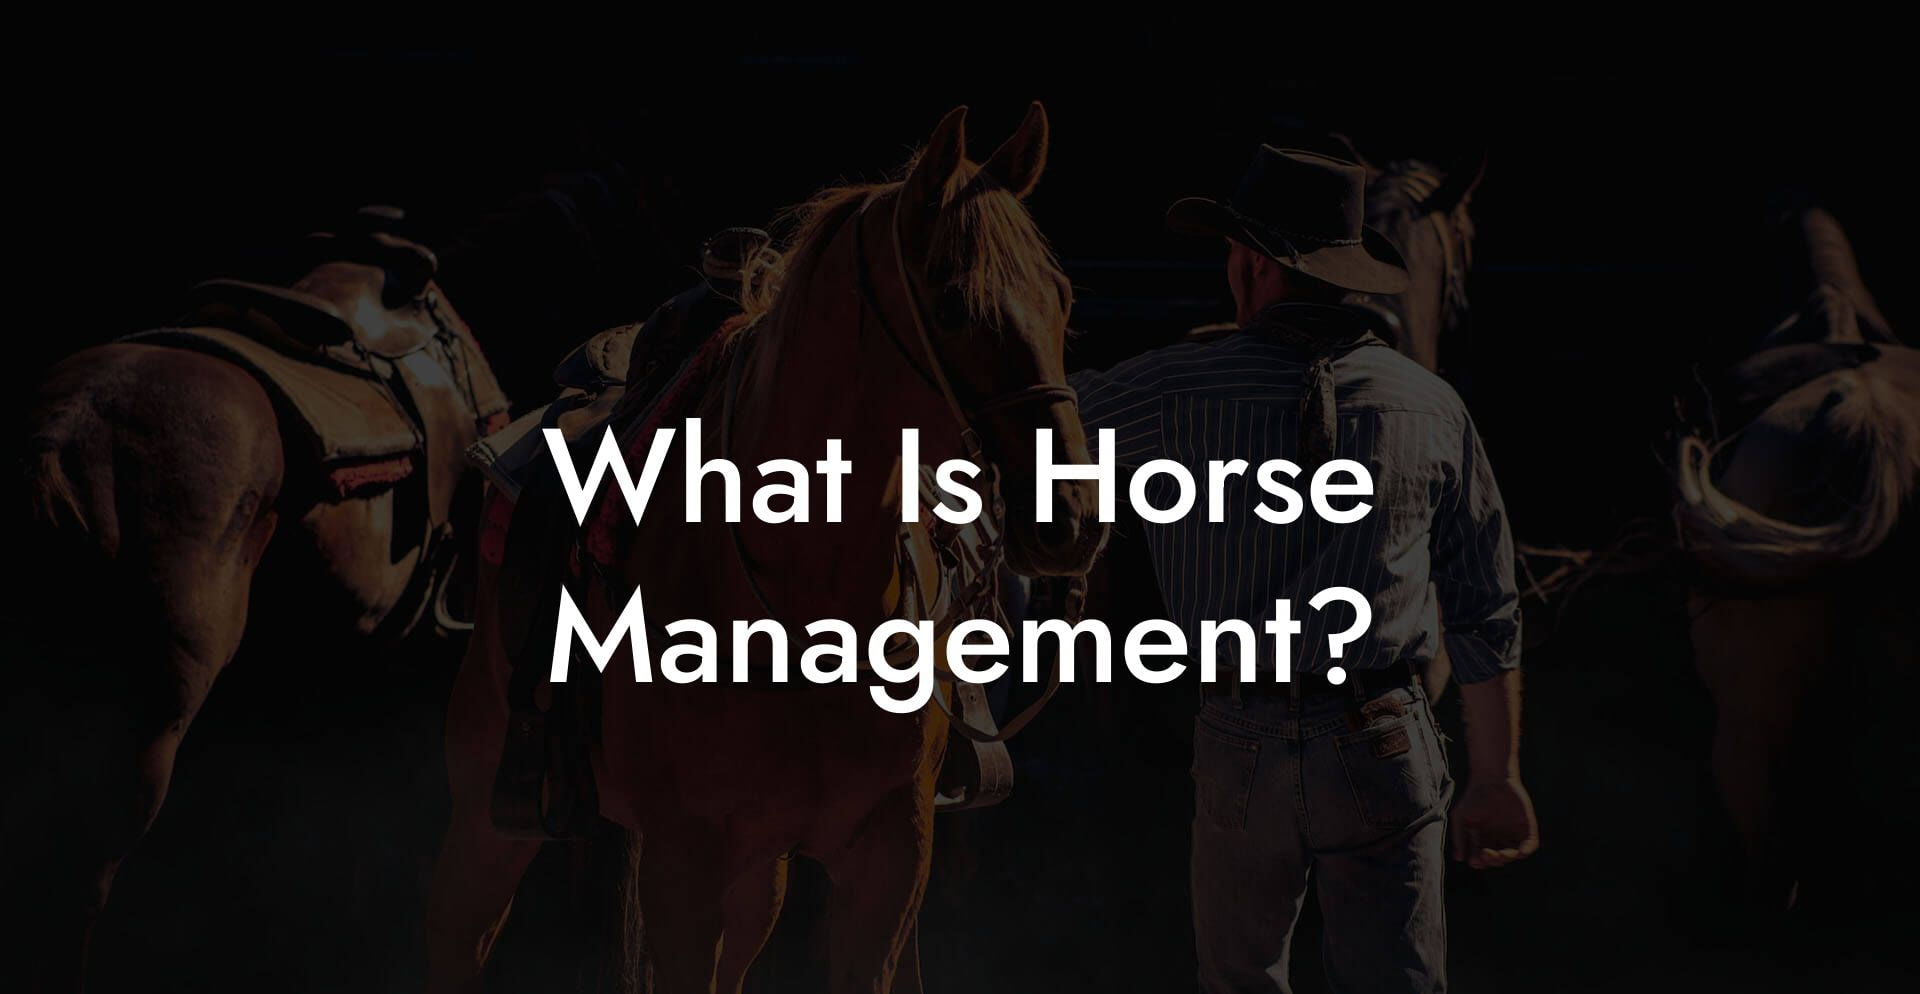 What Is Horse Management?